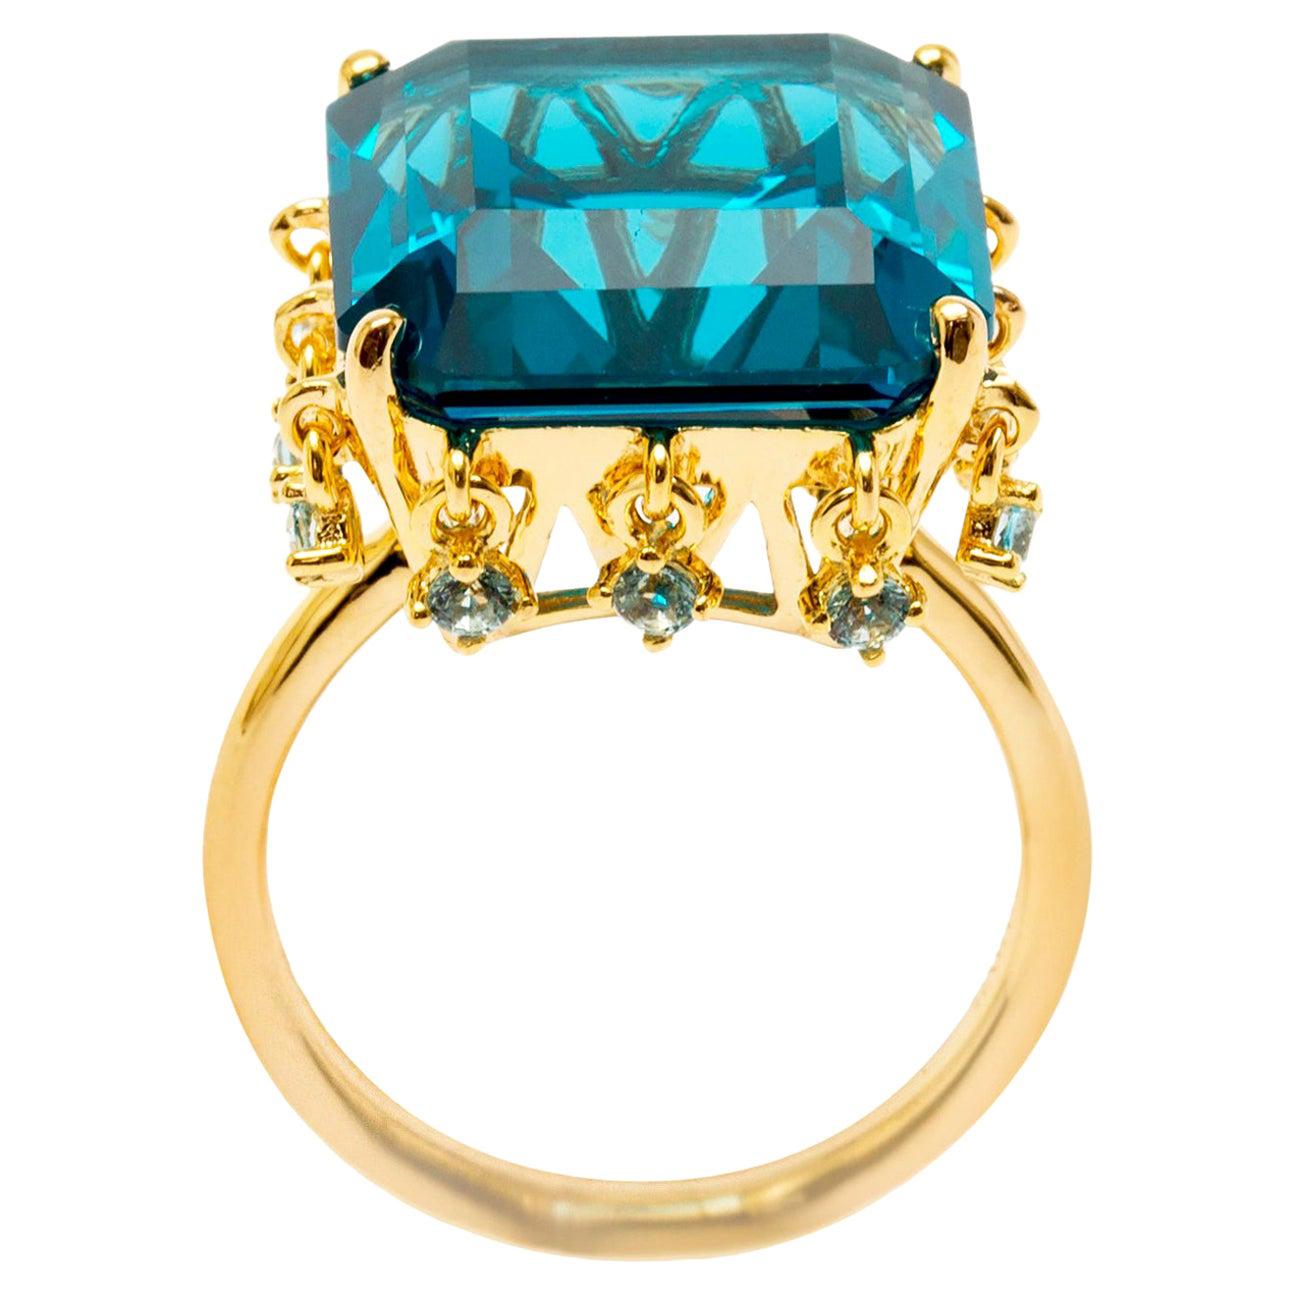 Ammanii Blue Topaz Cocktail Ring with Charms Vermeil Gold